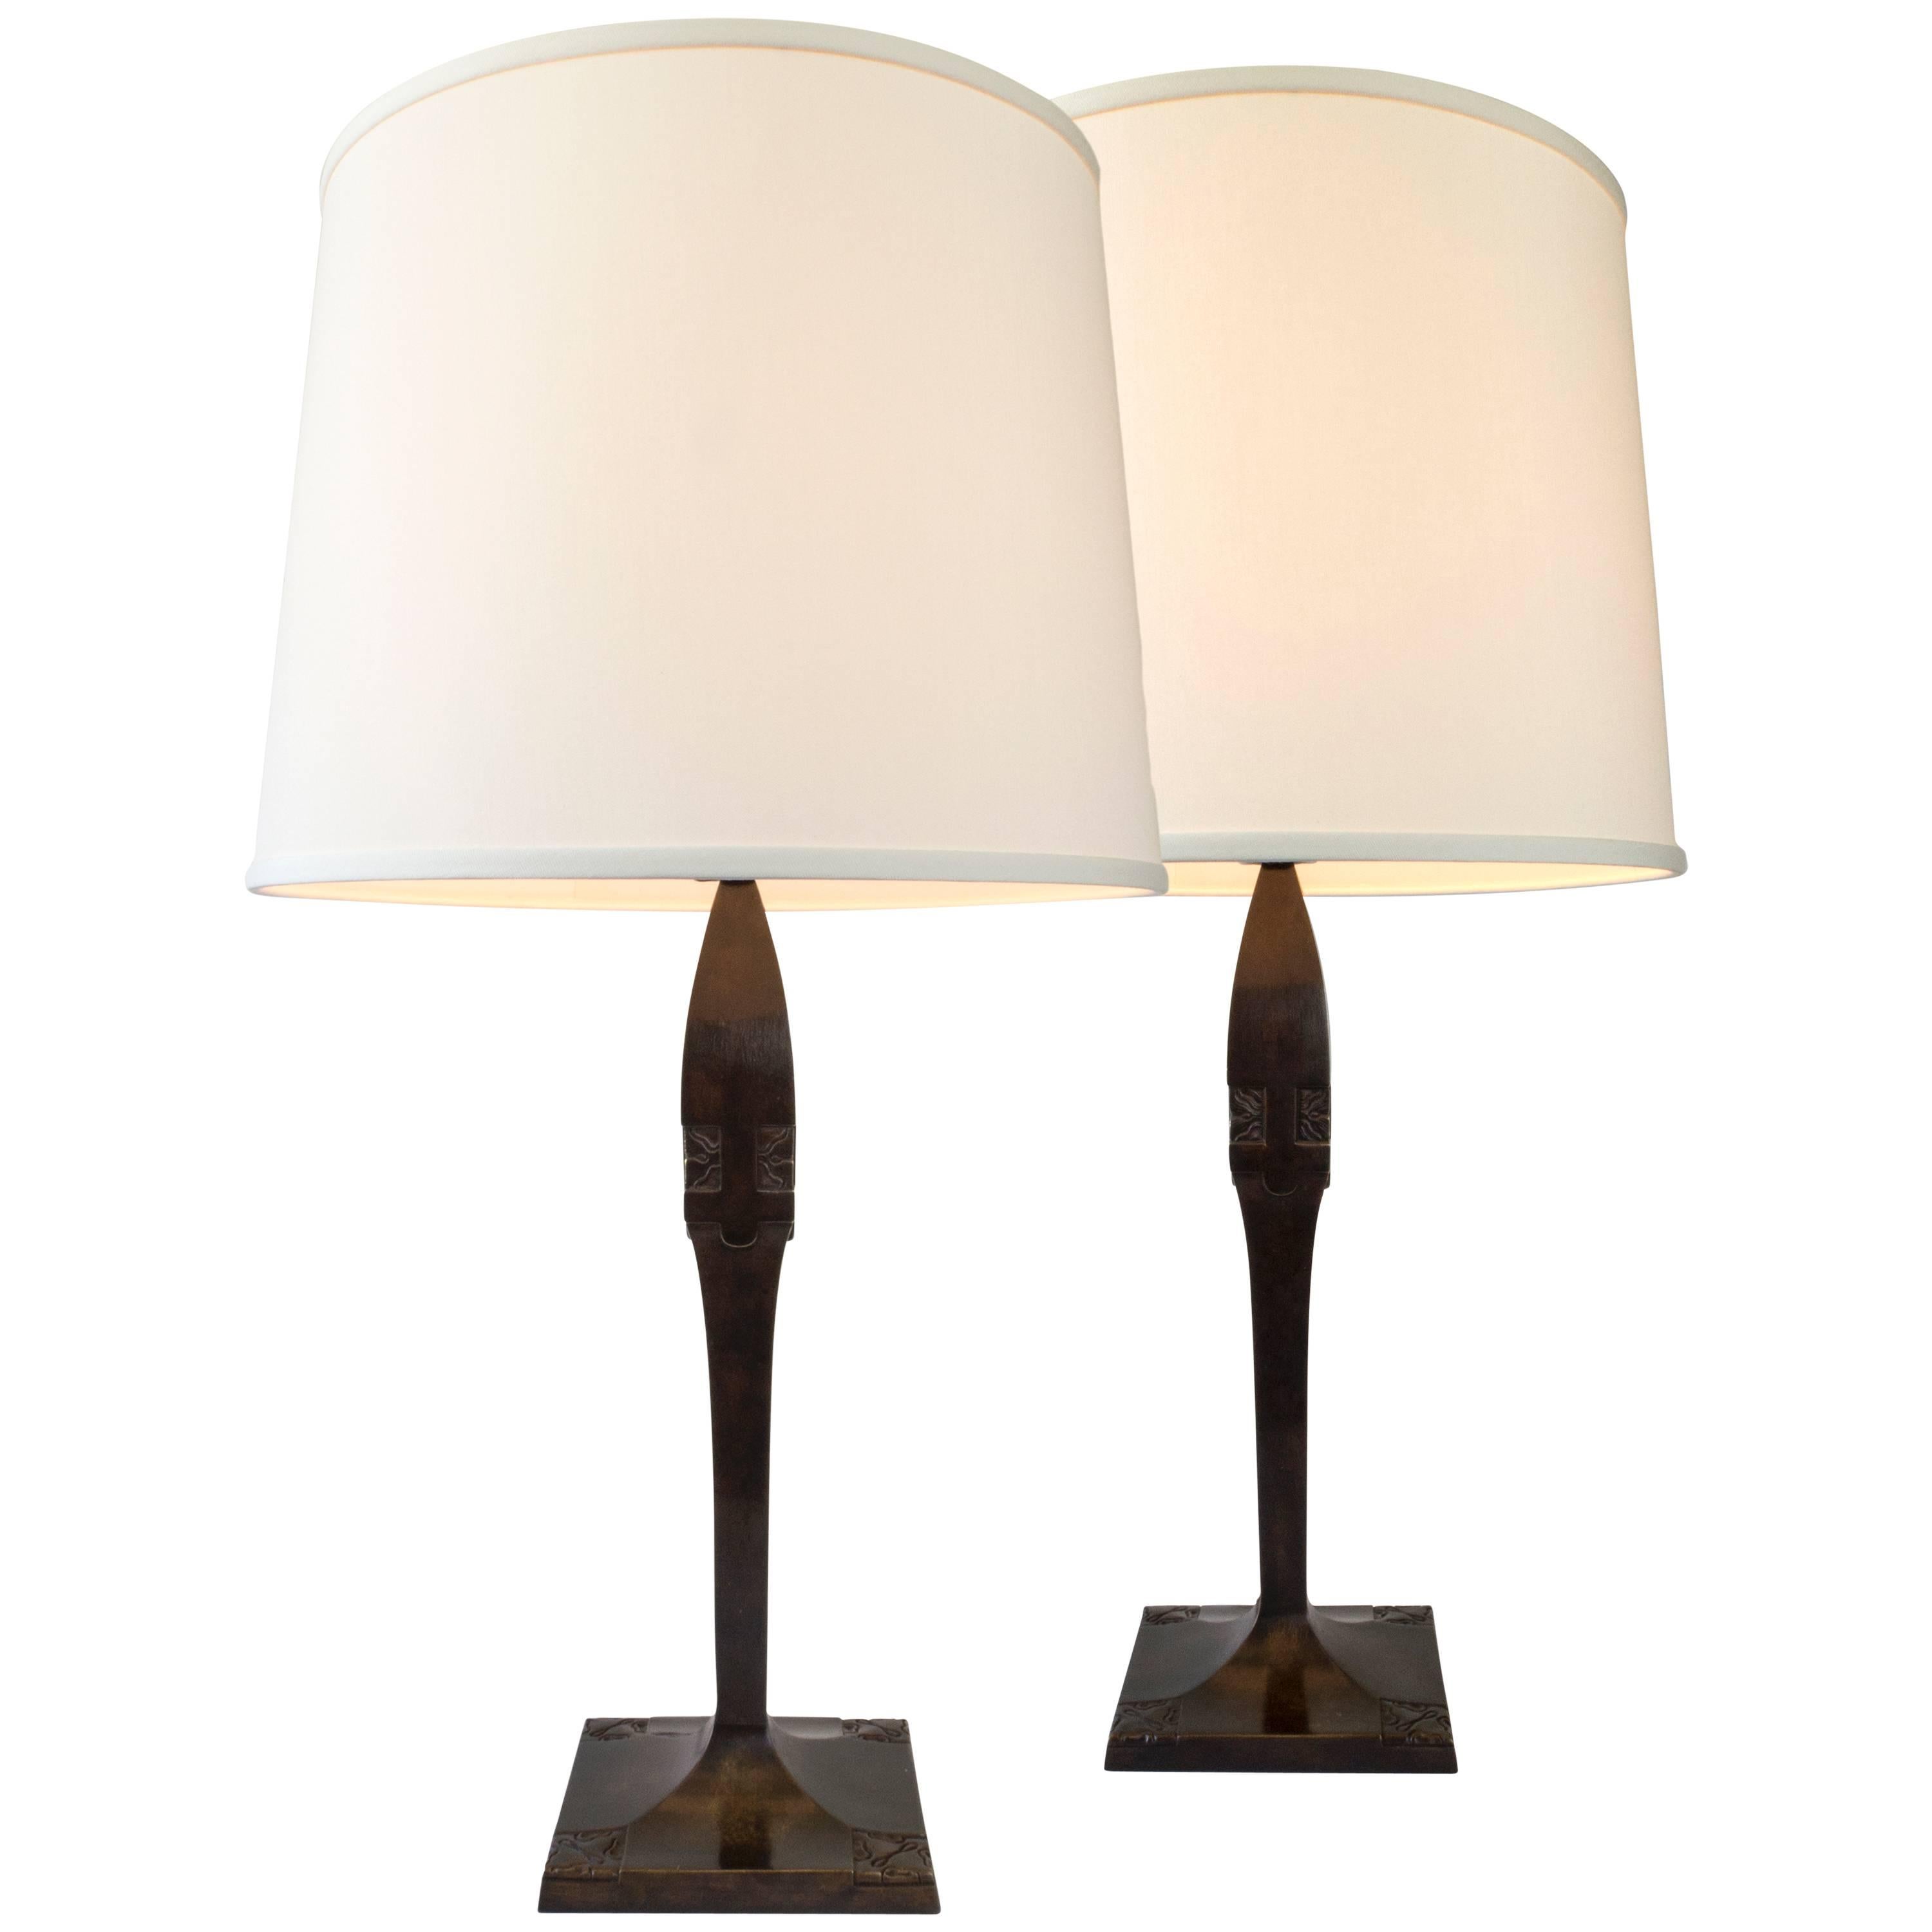 Thorvald Bindesbøll, Matched Pair of Danish Patinated Bronze Jugend Table Lamps